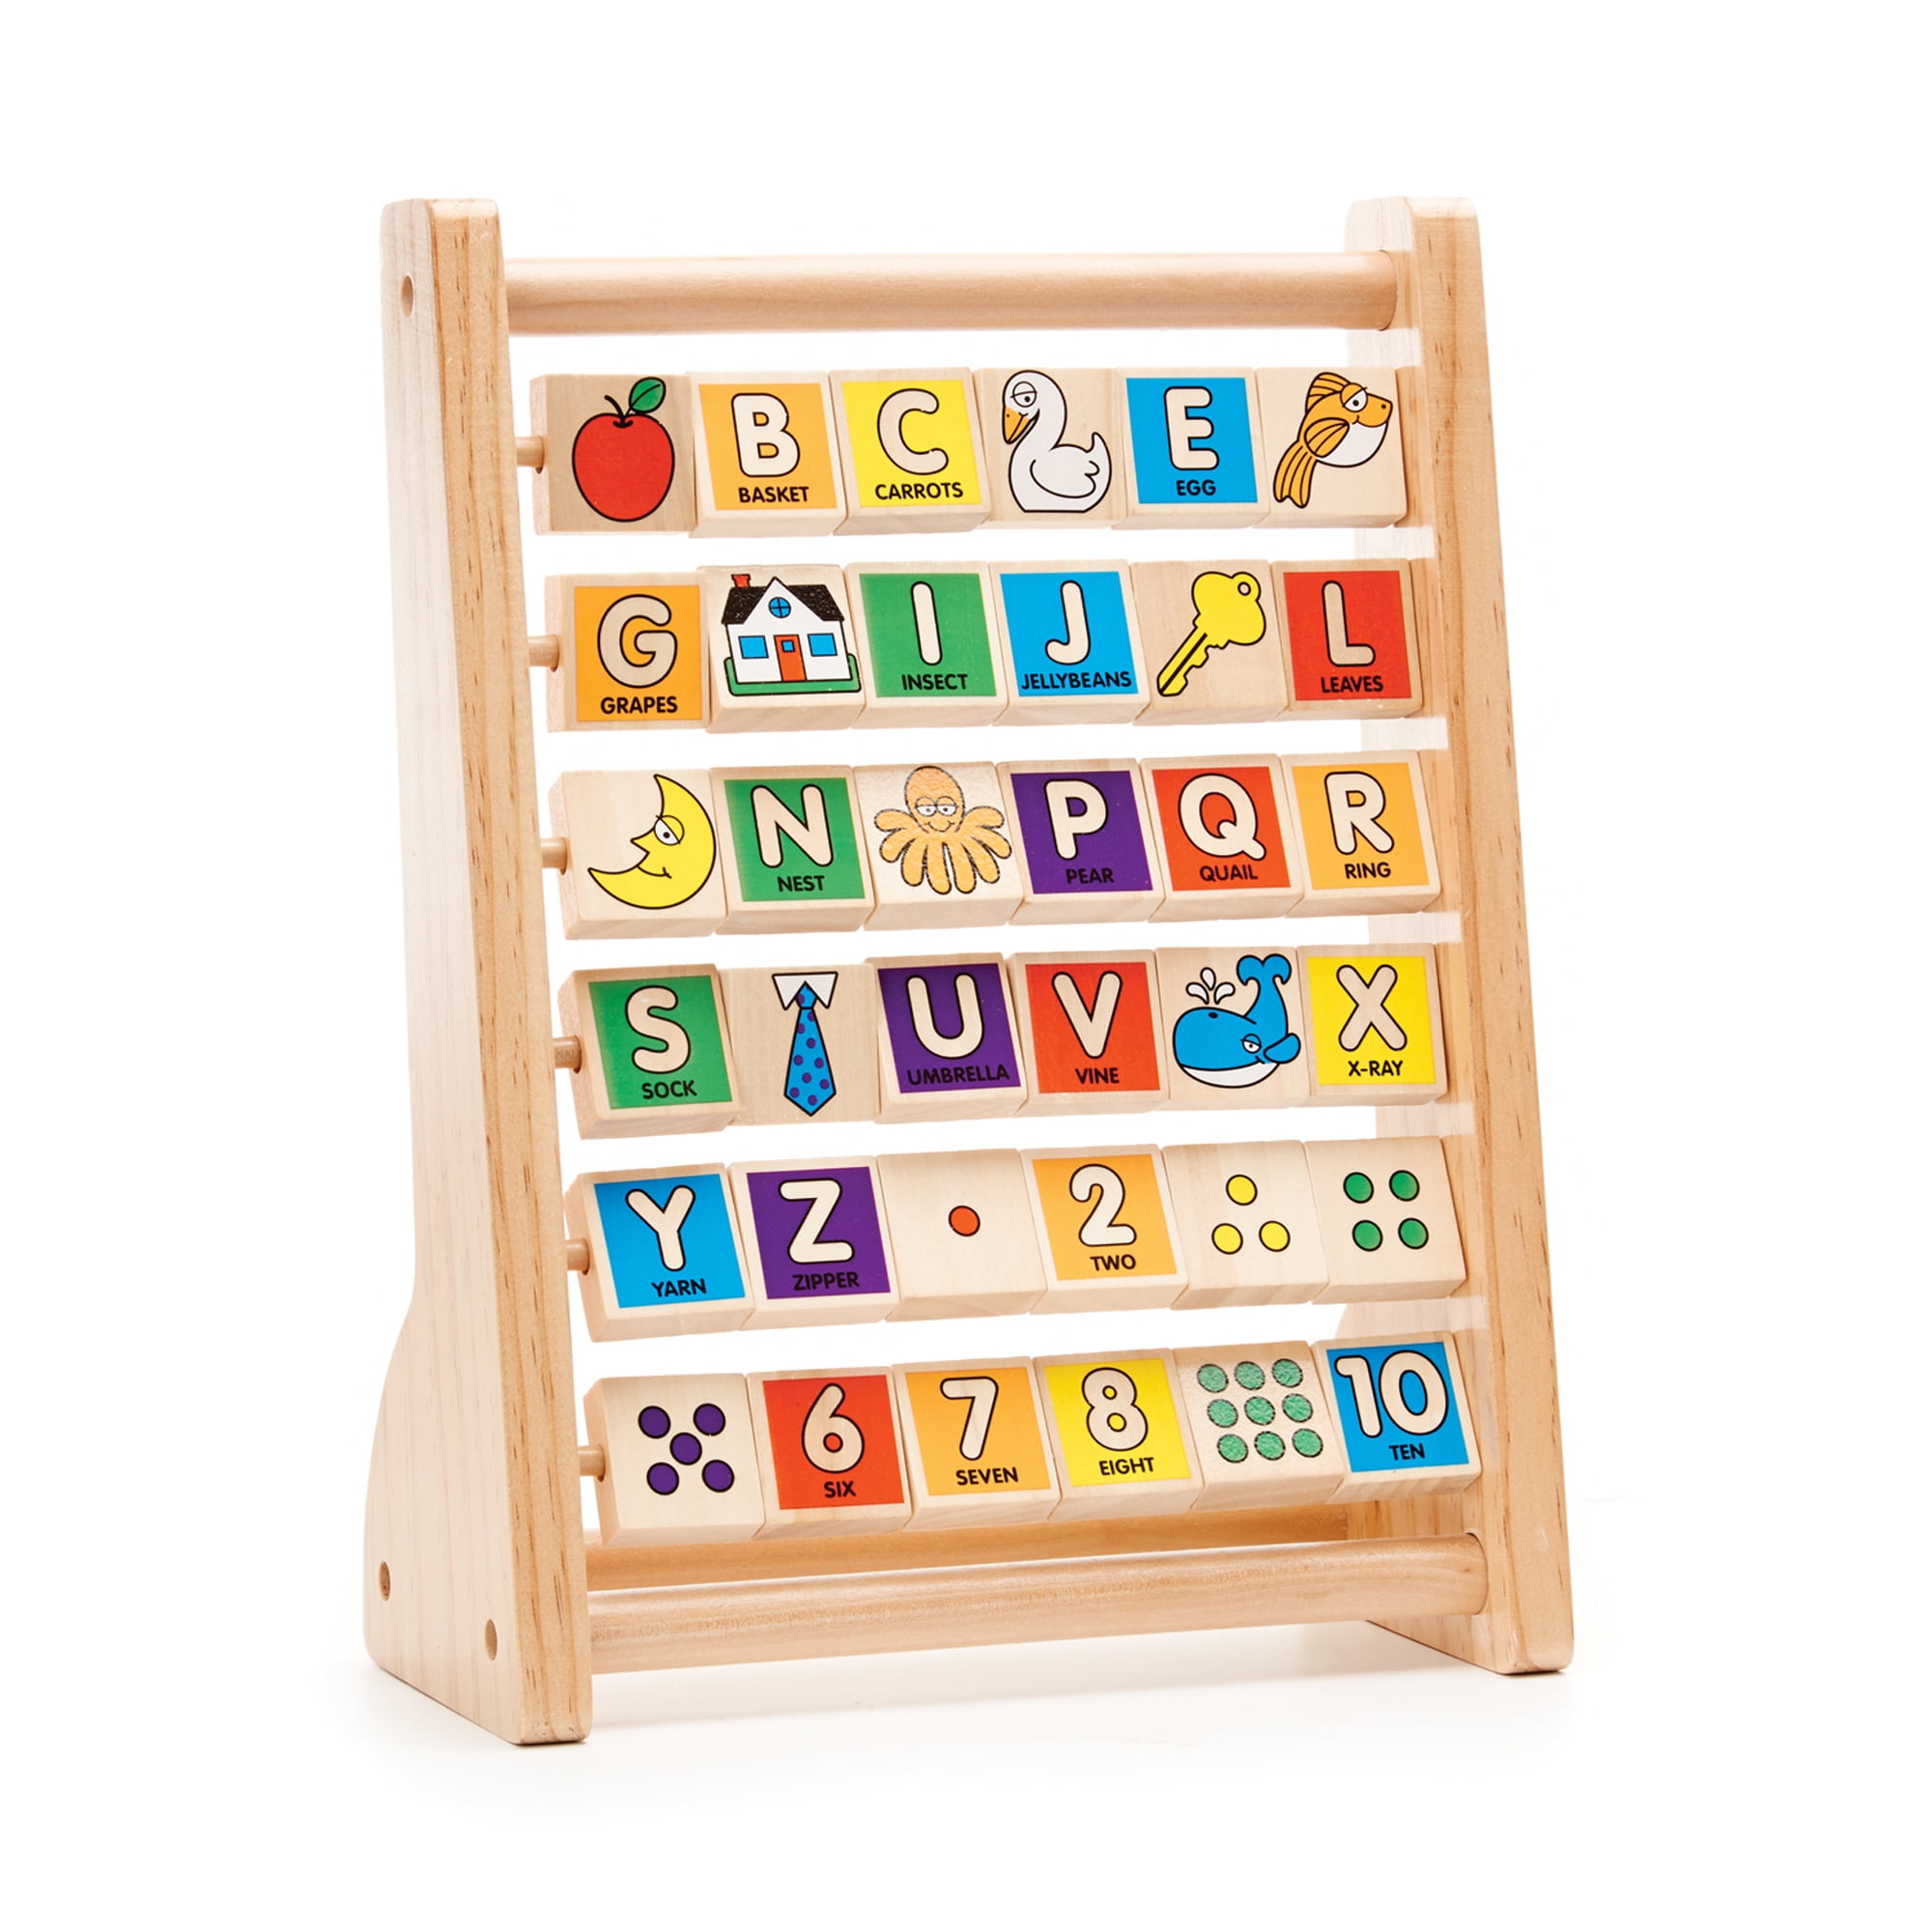 Melissa & Doug Abacus Classic Wooden Educational Counting Toy With 100 Beads 2 